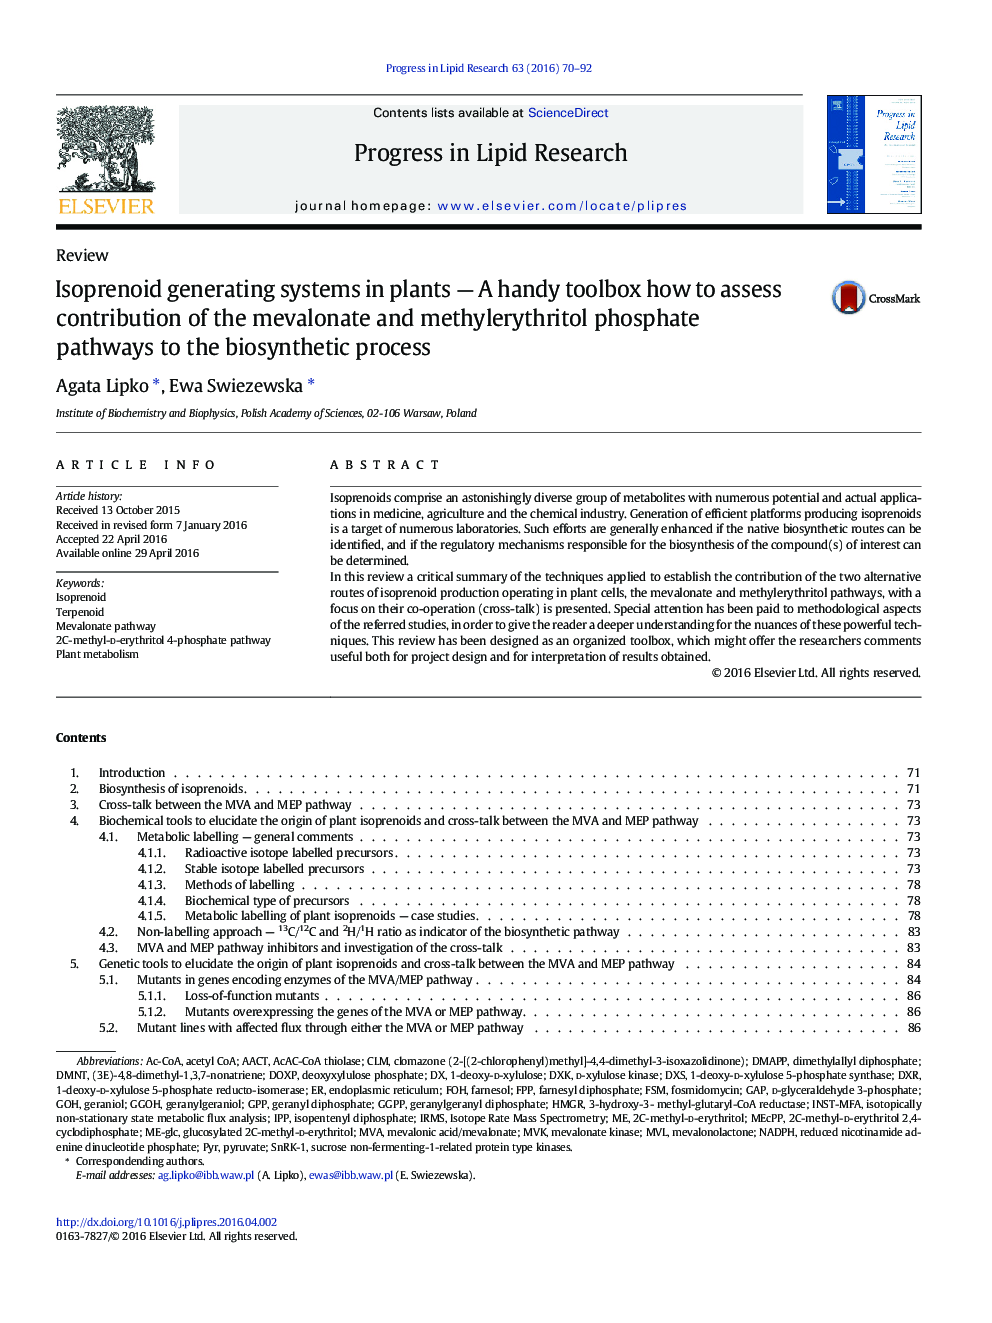 Isoprenoid generating systems in plants - A handy toolbox how to assess contribution of the mevalonate and methylerythritol phosphate pathways to the biosynthetic process